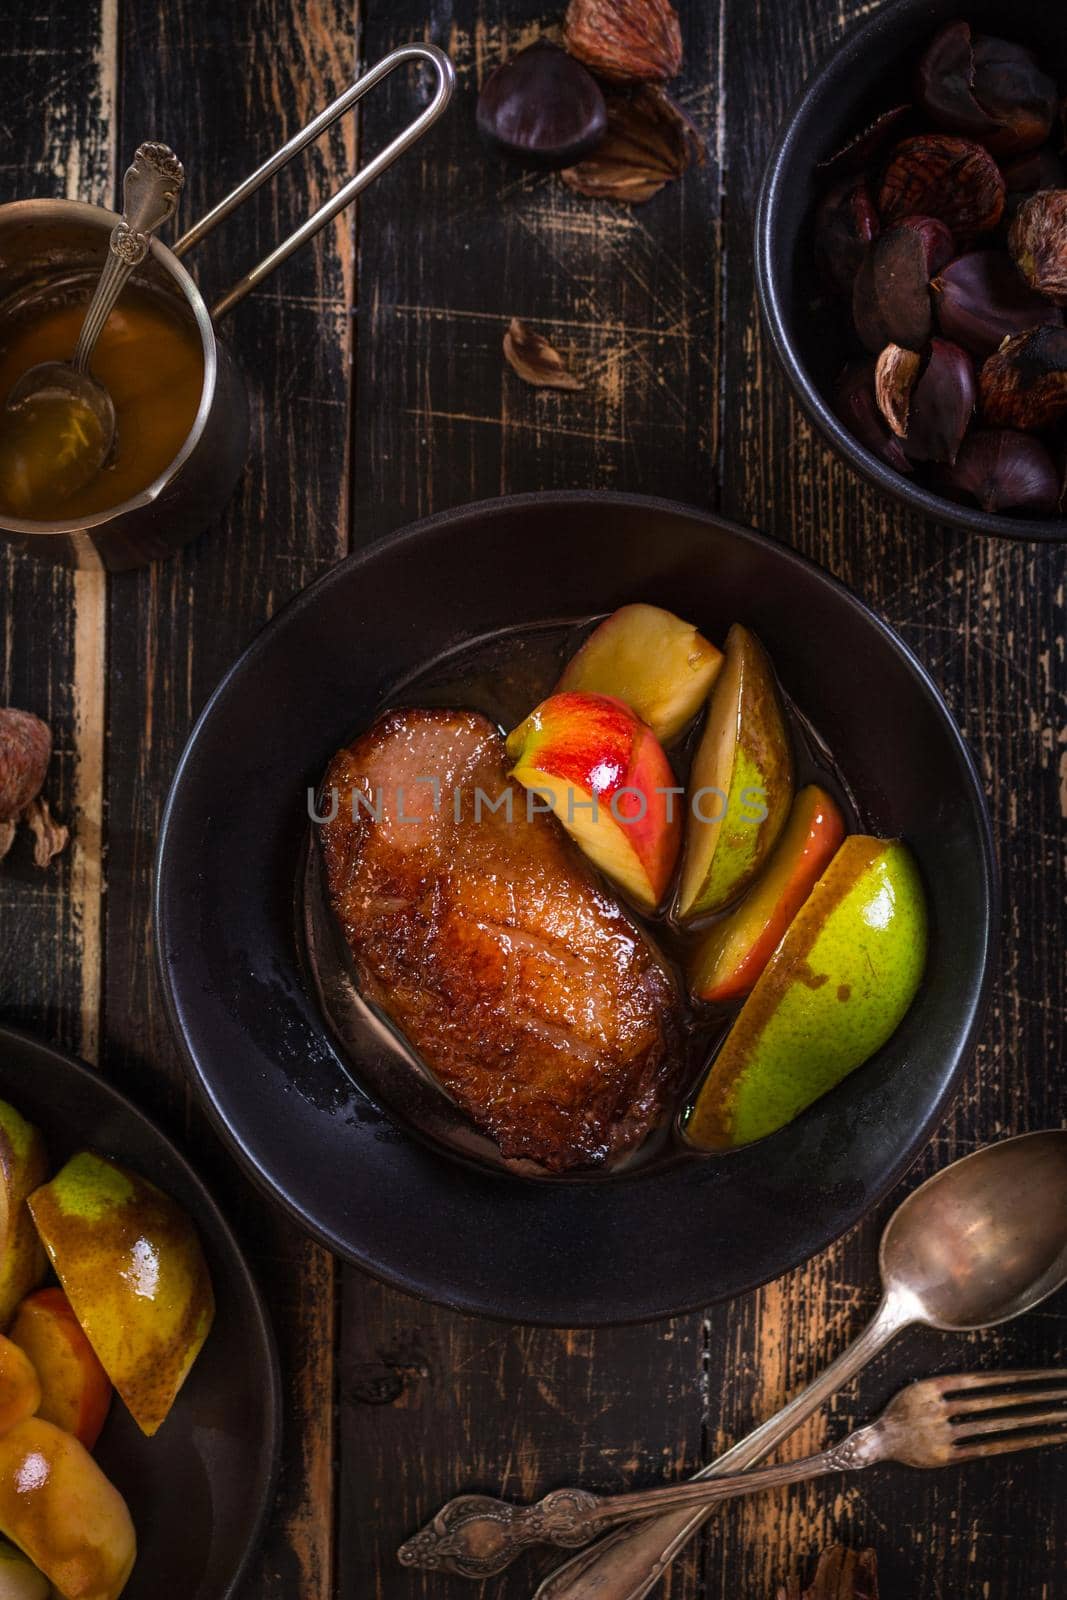 Roasted duck breast with golden crispy skin served with baked apples and chestnuts. Served on a ceramic black plate over rustic dark wooden table. Top view